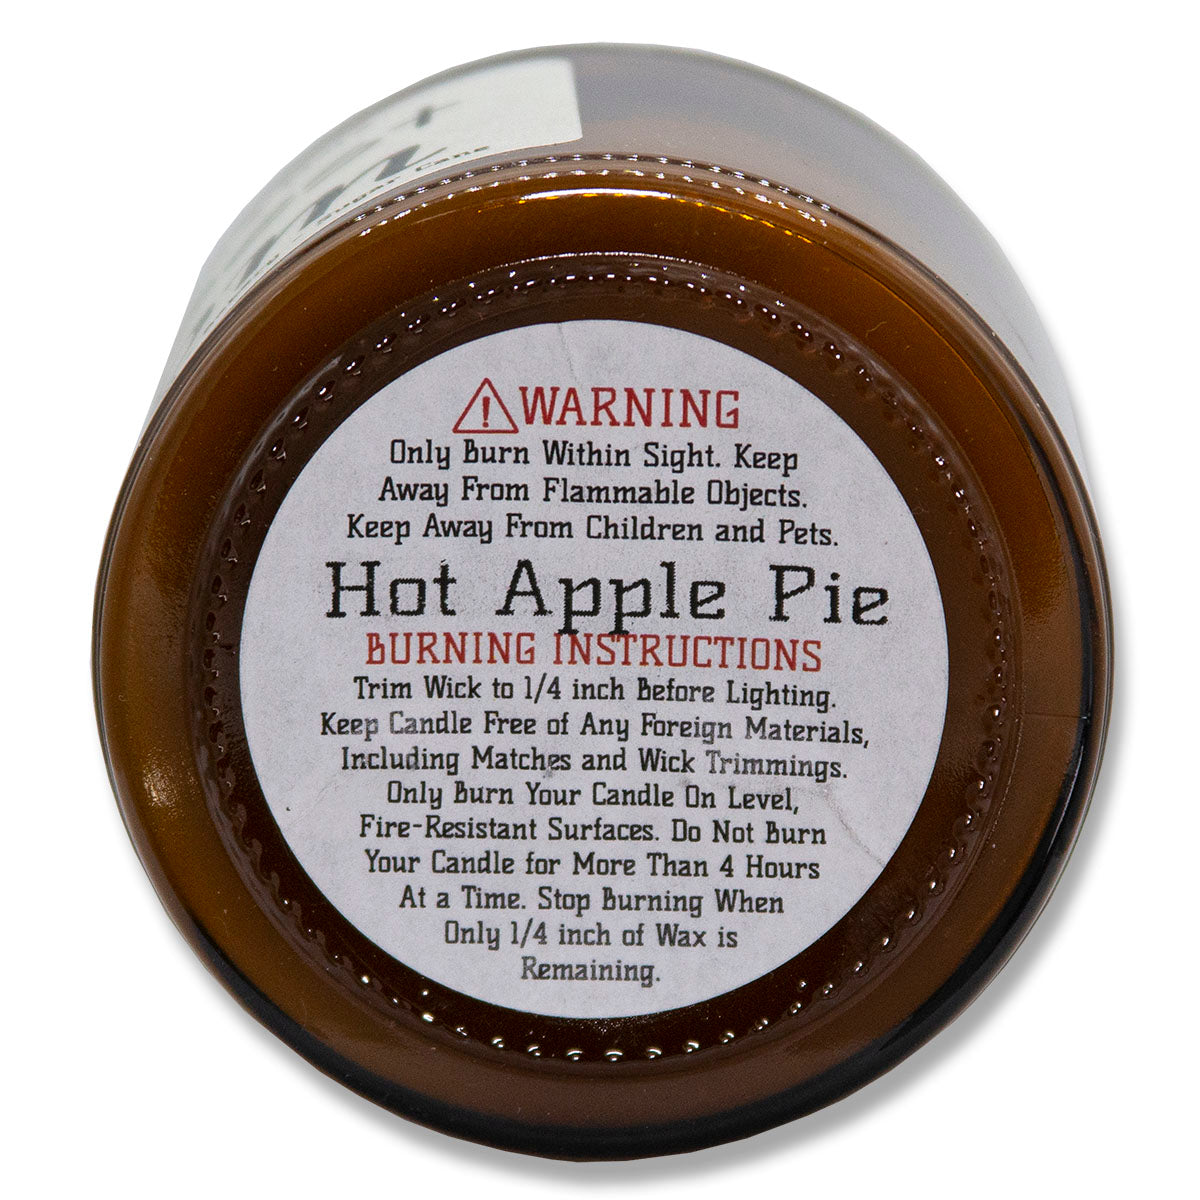 Hot Apple Pie, Lone Star Candles & More's Premium Hand Poured Strongly Scented Soy Wax Gift Candle, Warm Sweet Baked Apples, and Flaky Pie Crust, USA Made in Texas, Amber Glass Jar 9oz Best Mom